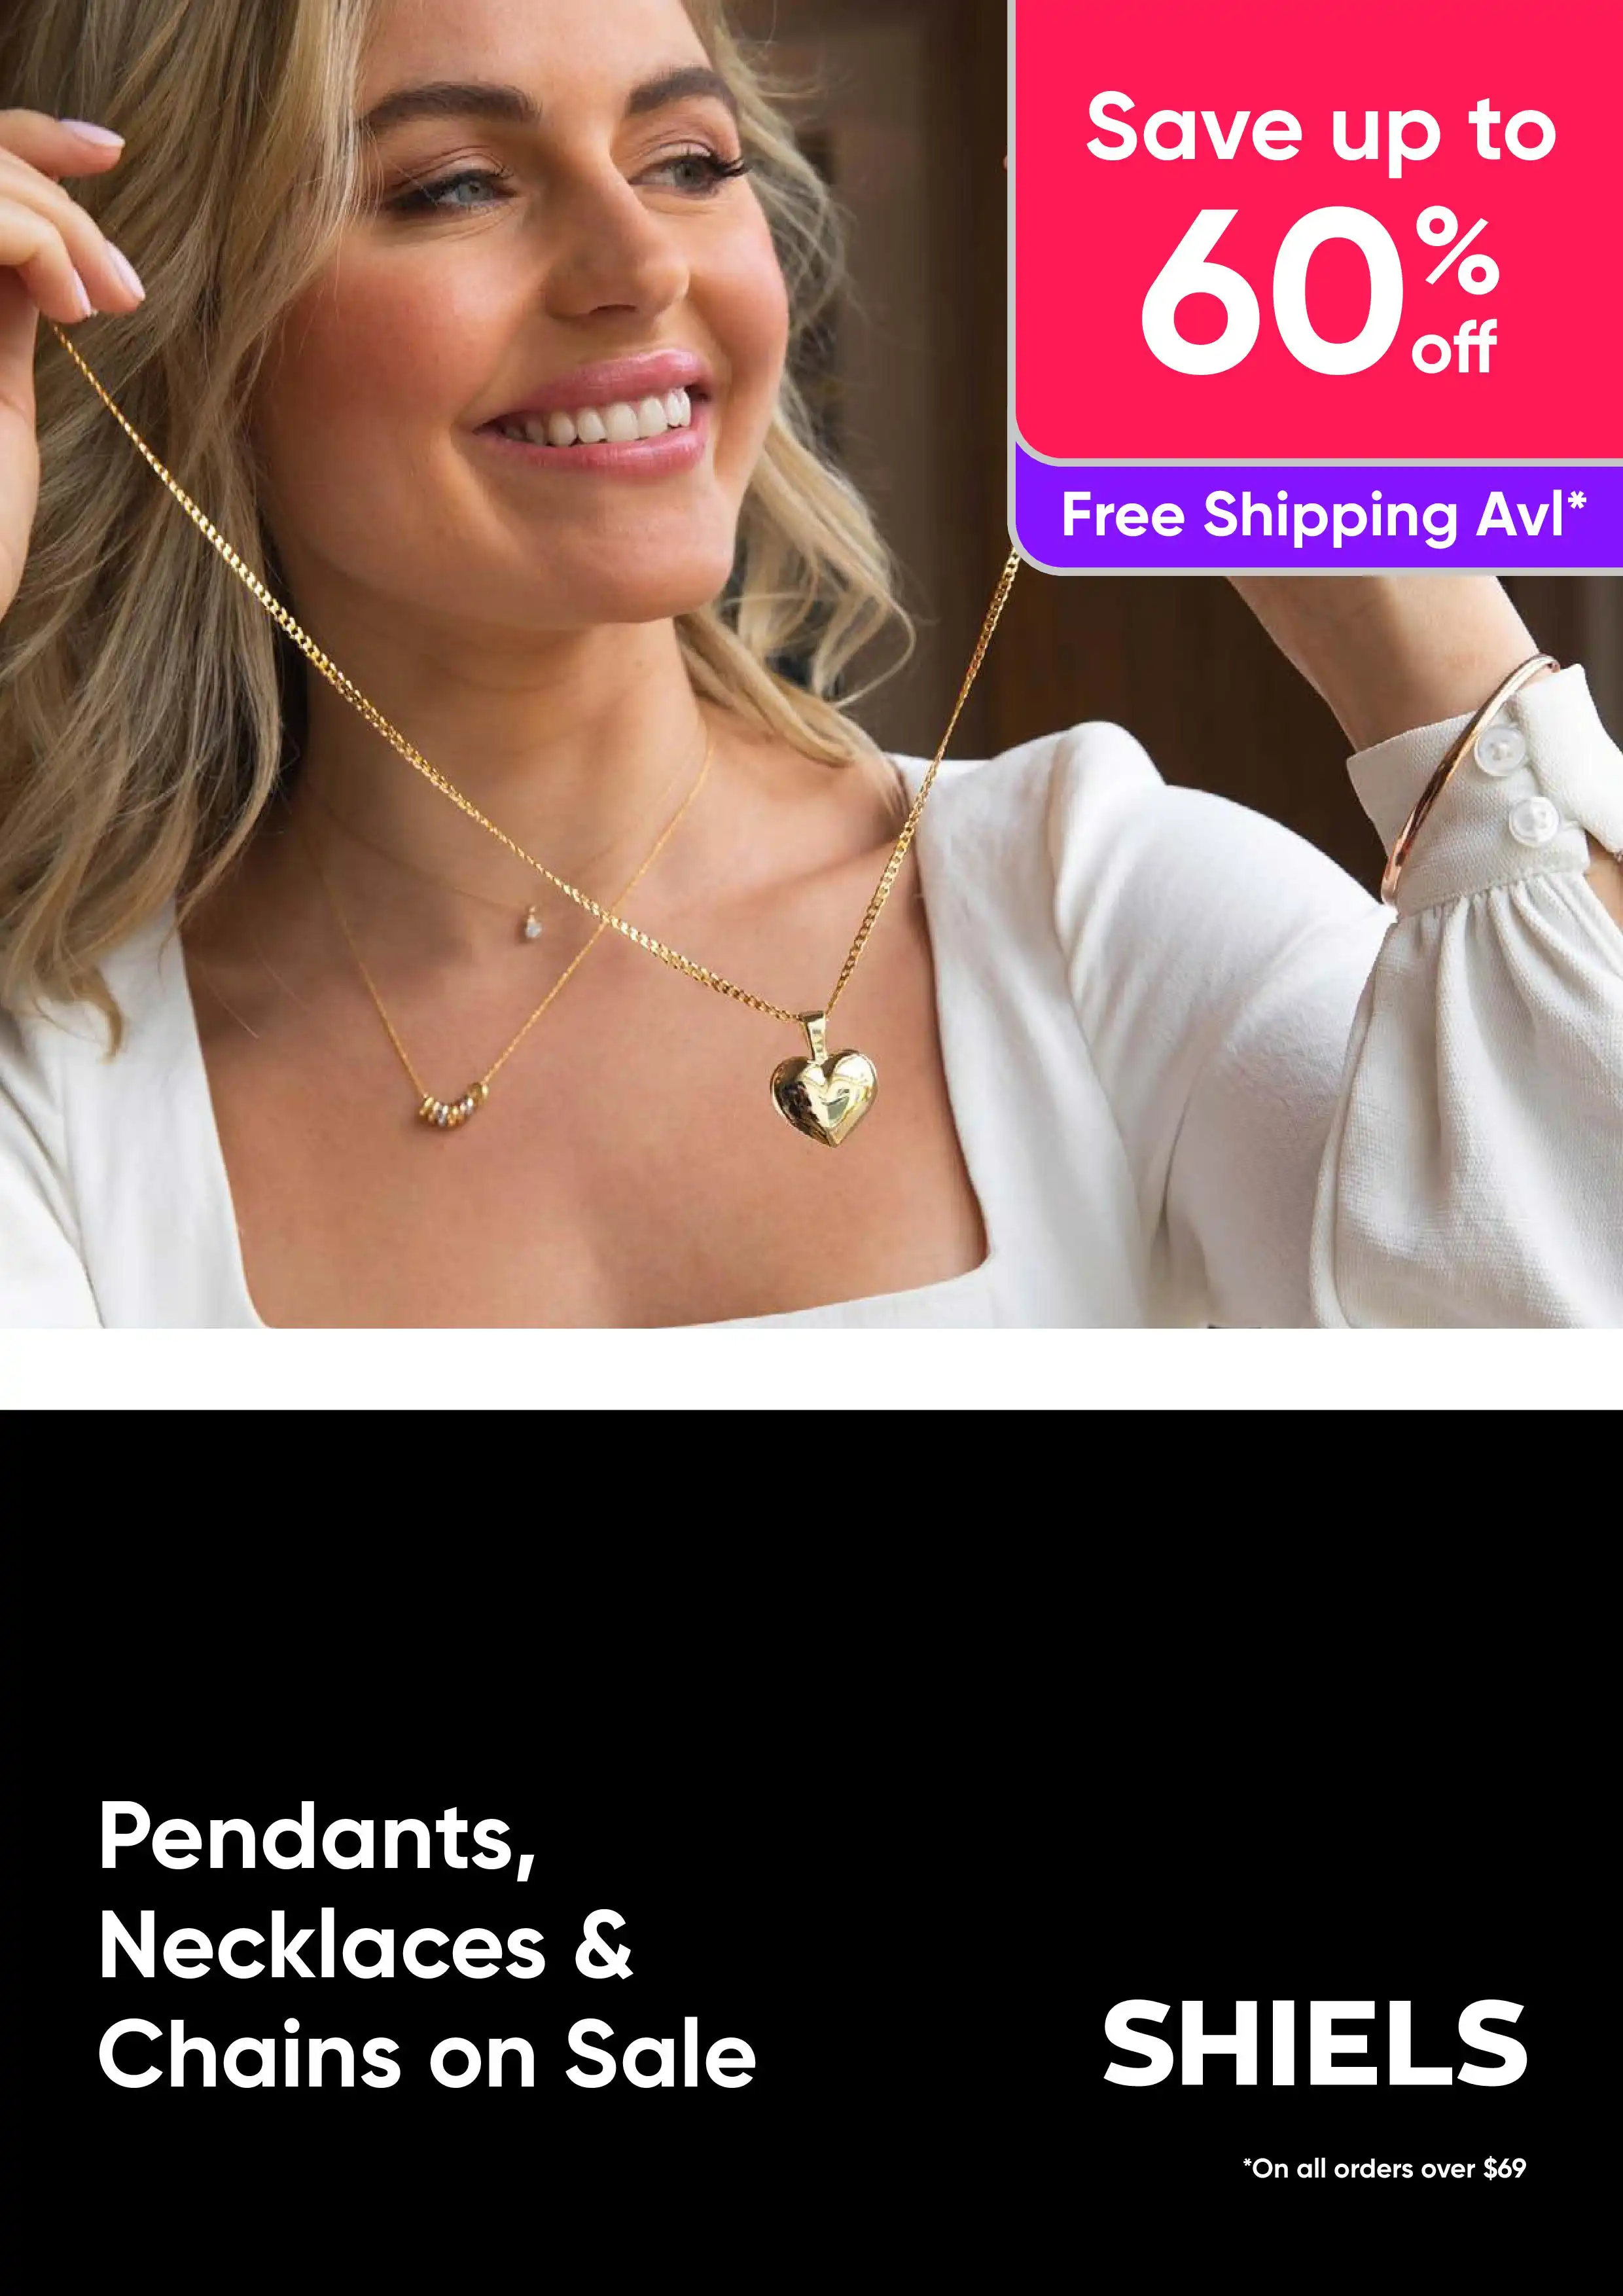 Shiels Pendants, Necklaces, Chains up to 60% Off